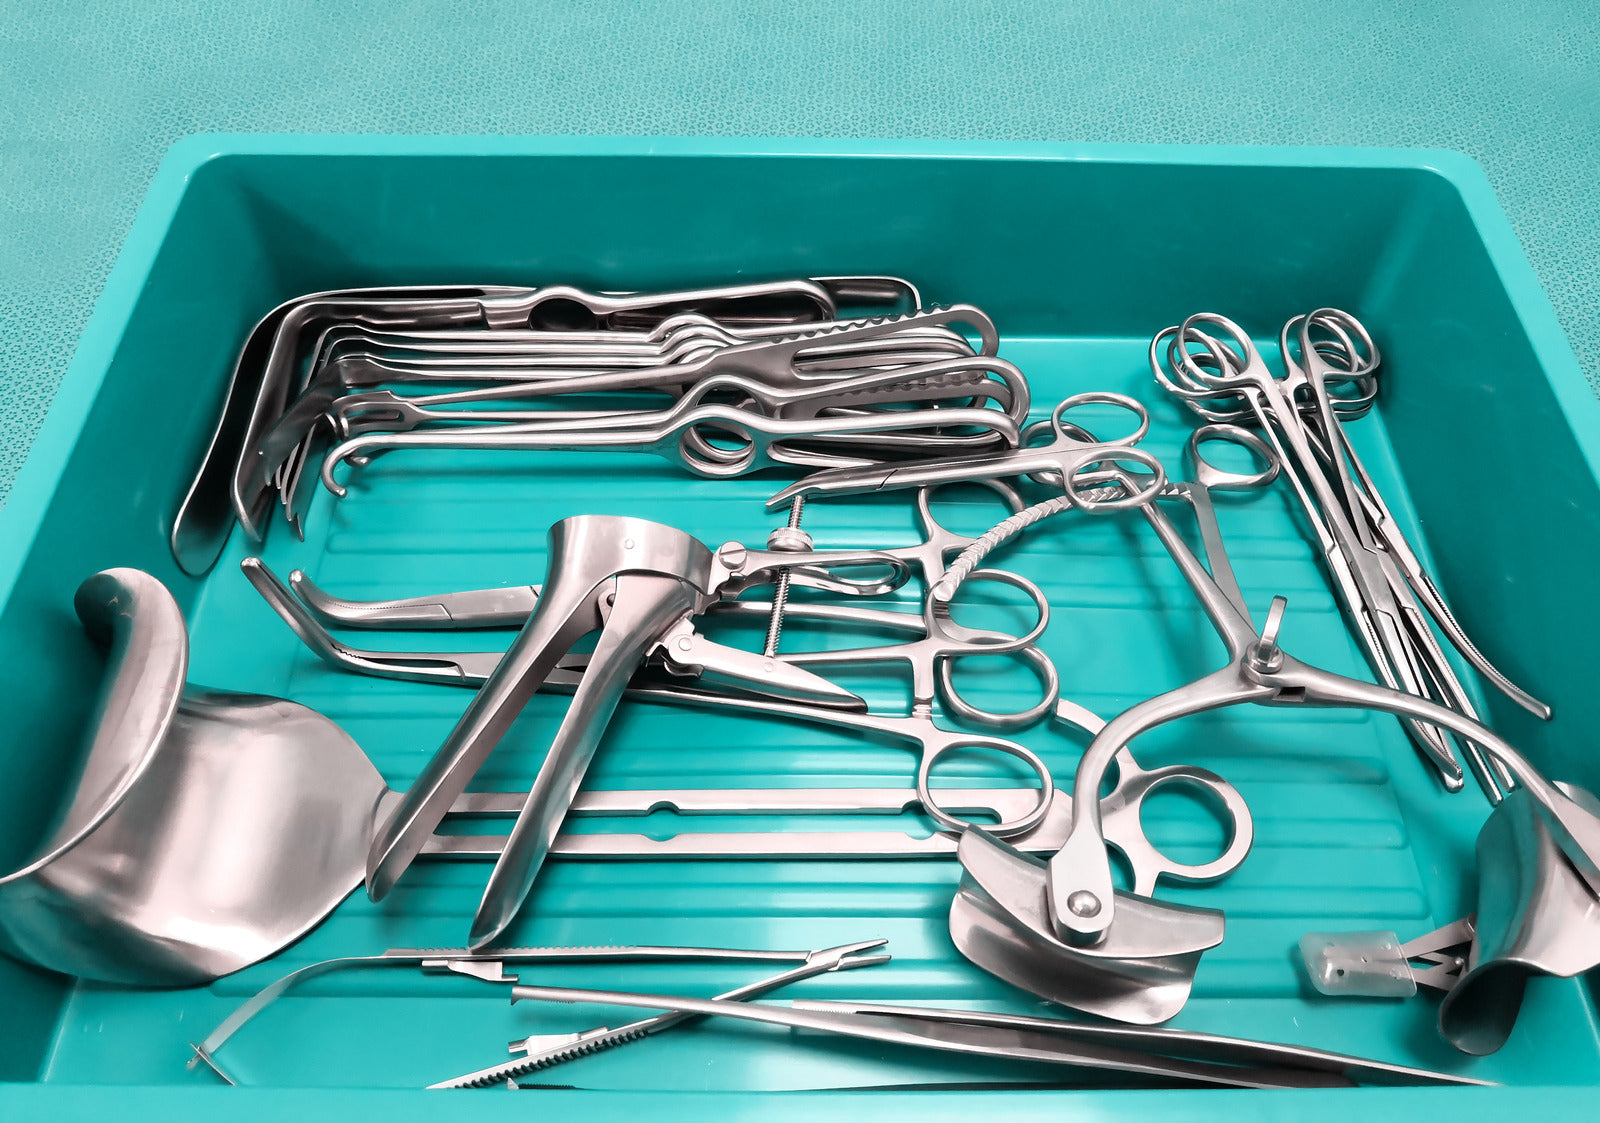 General-Surgical-Instruments-What-Are-They-And-What-Are-They-Used-For Medilogic